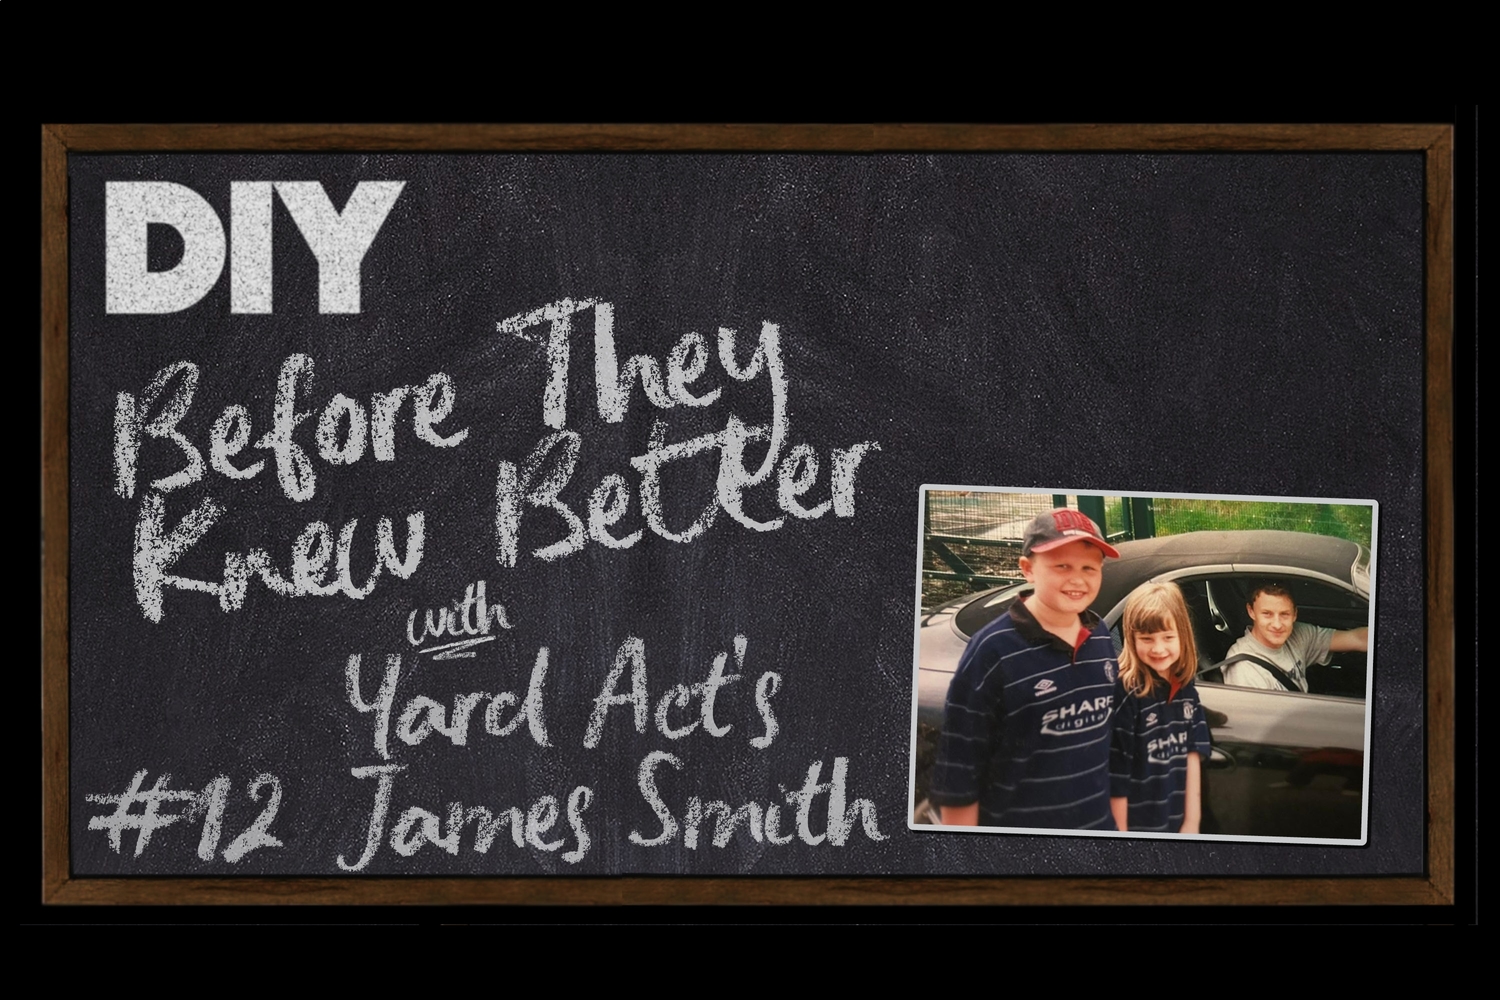 Yard Act’s James Smith concludes series one of DIY’s podcast Before They Knew Better